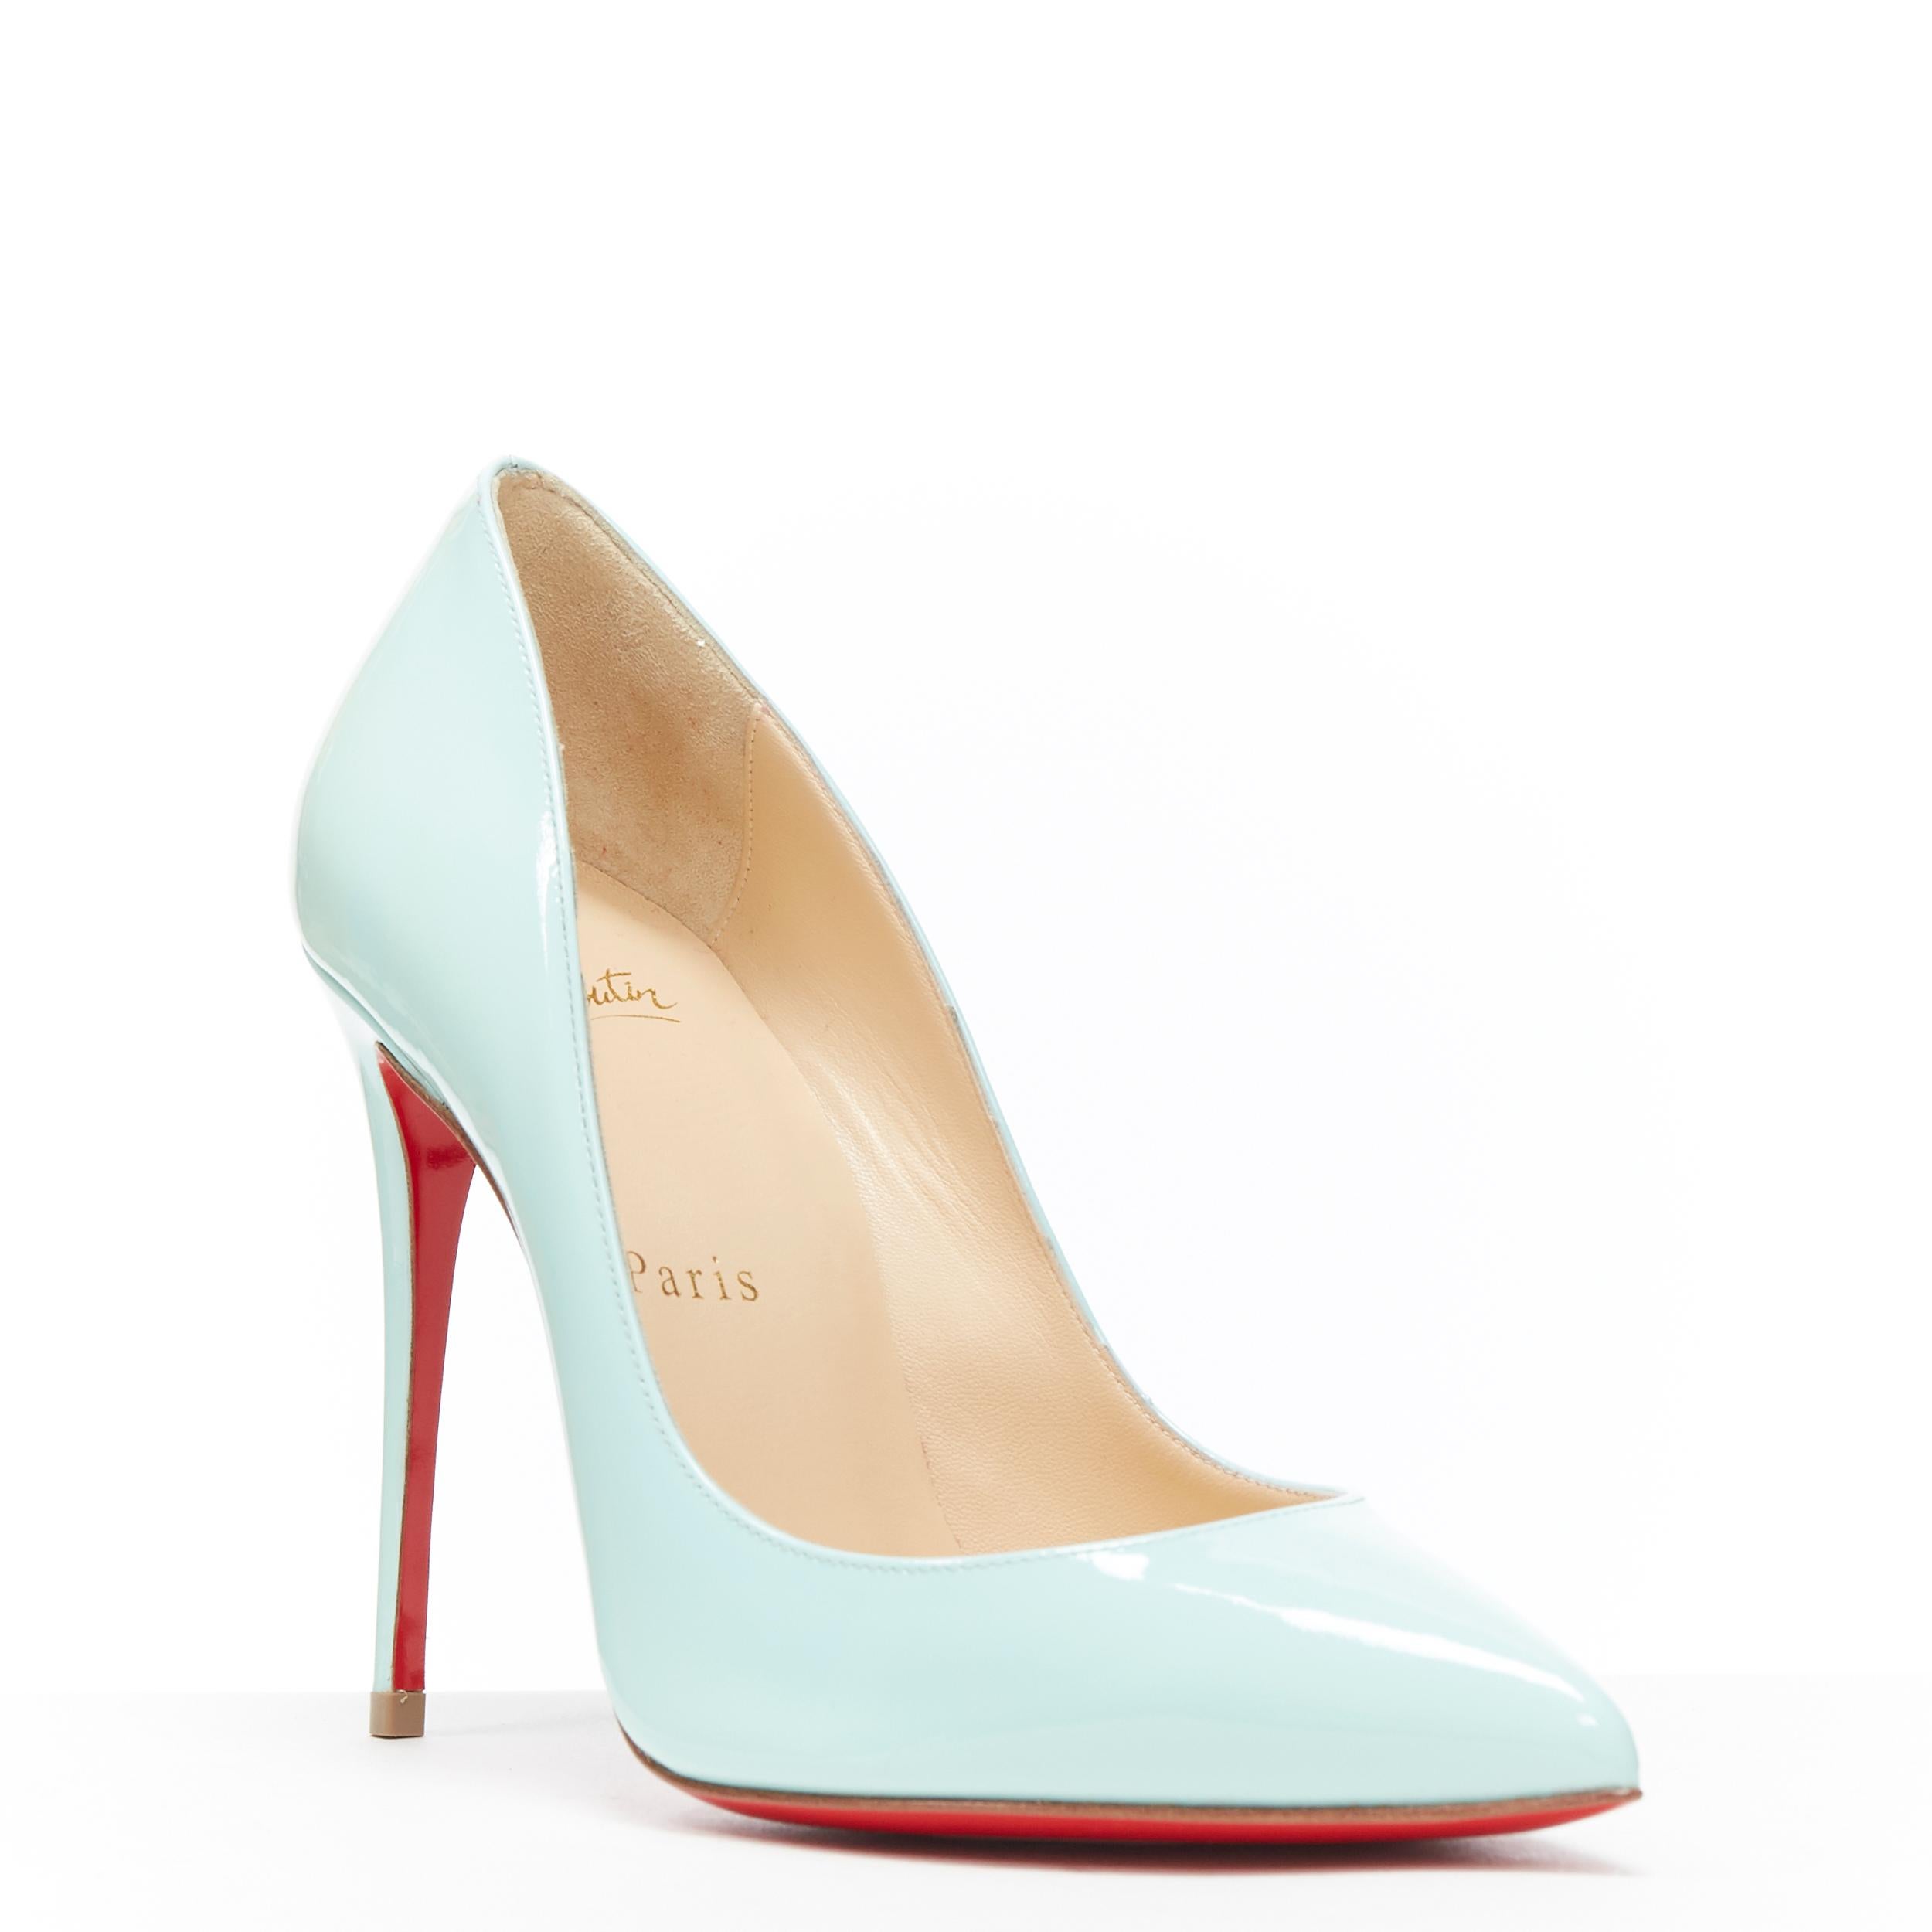 new CHRISTIAN LOUBOUTIN So Kate 100 mint blue patent point toe pigalle pump EU36
Brand: Christian Louboutin
Designer: Christian Louboutin
Model Name / Style: So kate 100
Material: Patent leather
Color: Blue
Pattern: Solid
Lining material: